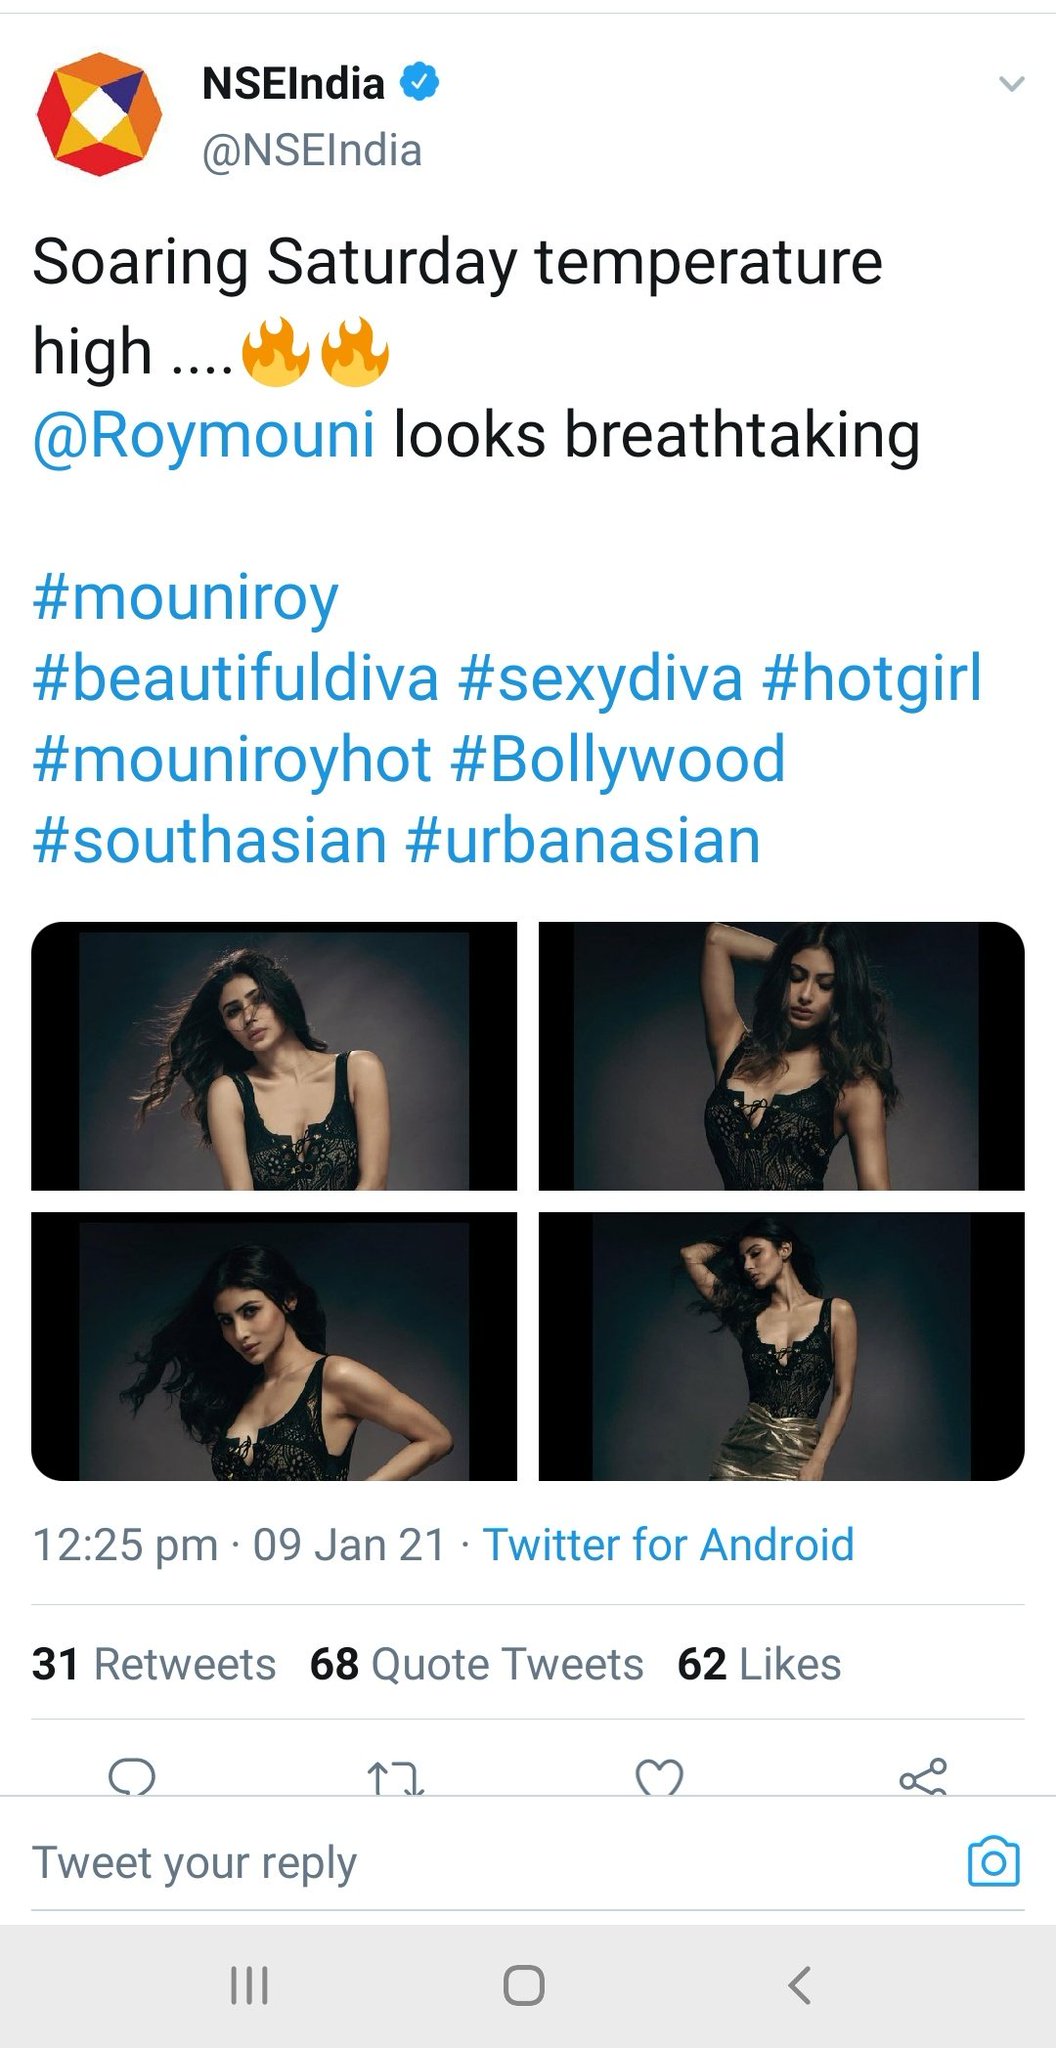 NSE India shares actor Mouni Roy's pics from its official Twitter handle